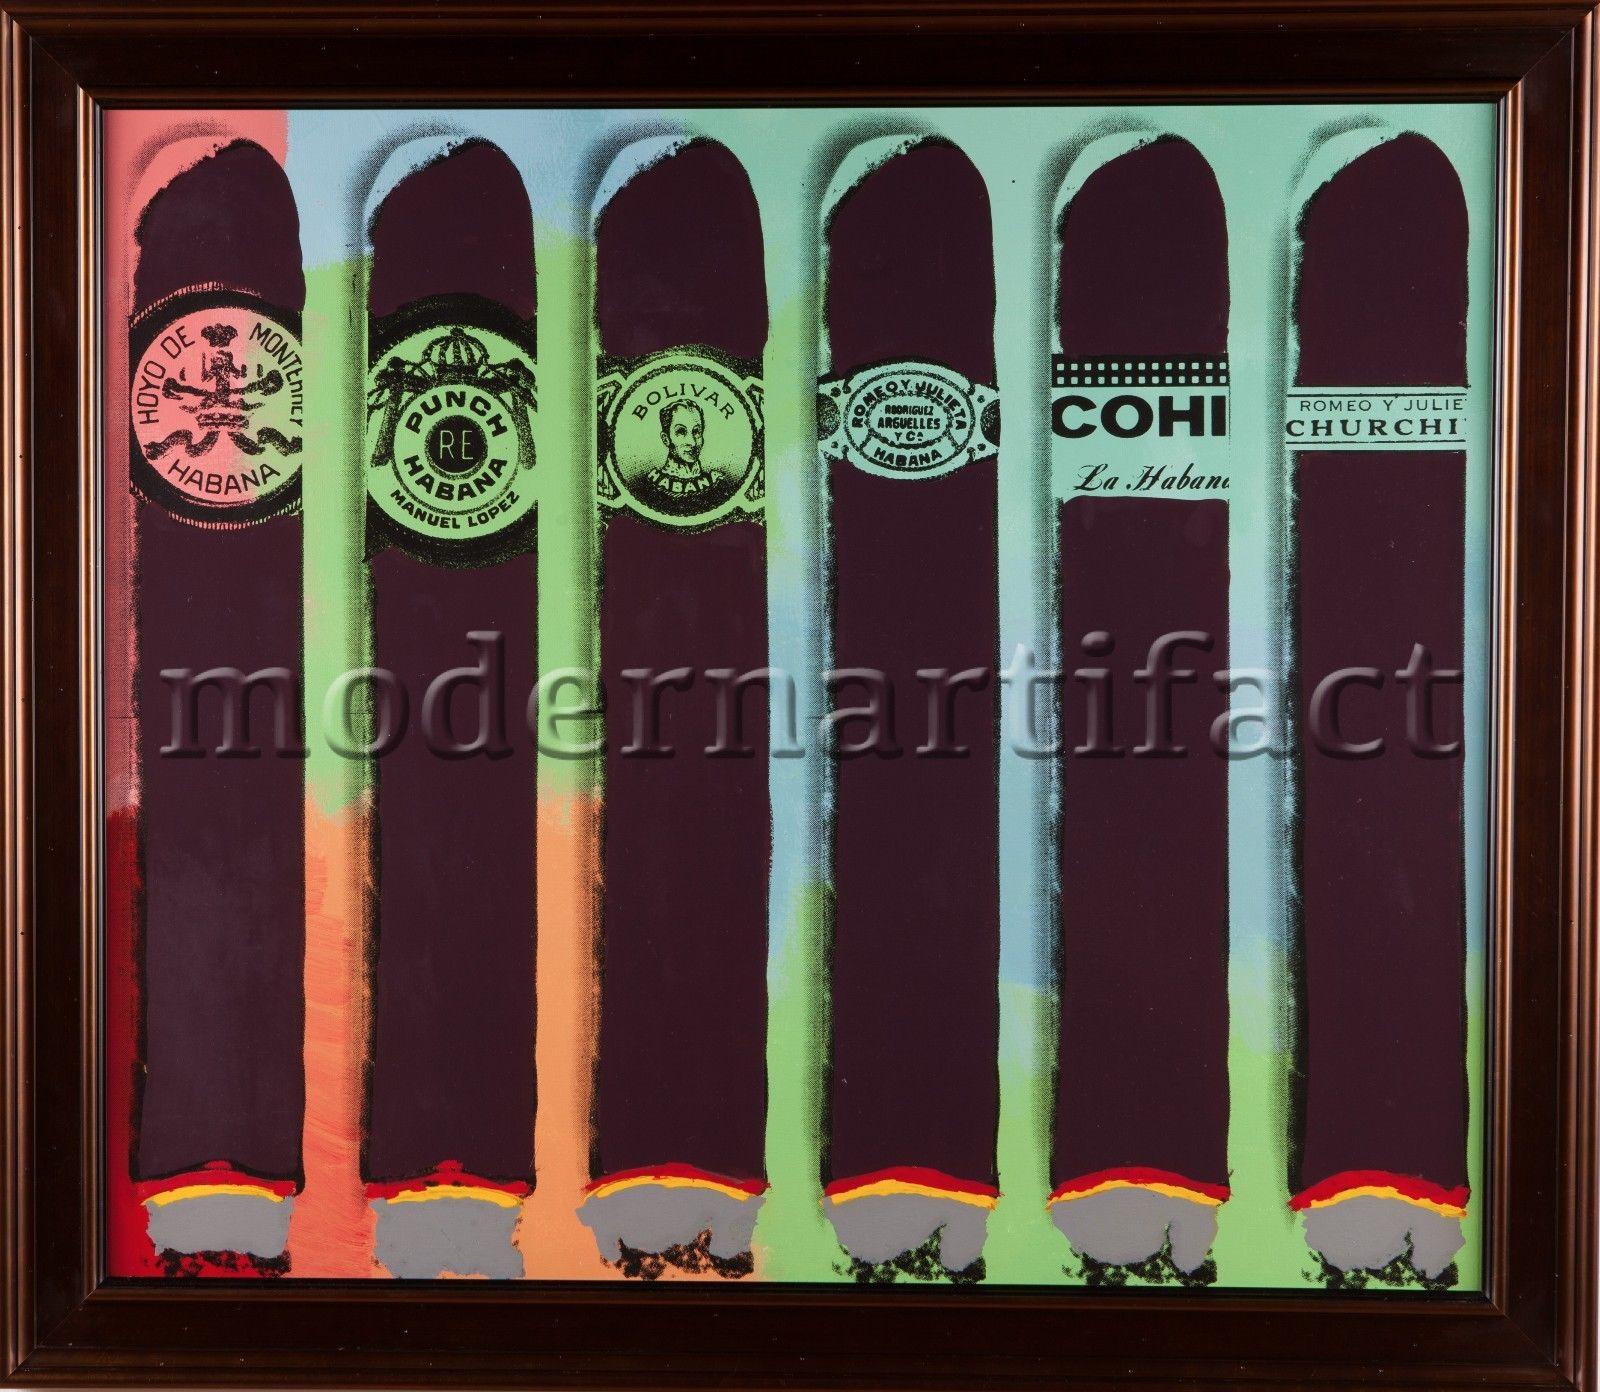 Artist: Steve Kaufman
Title: 6 Cigars Medium: Original Oil Painting on Screen print Canvas
Size: 33 1/2" x 40"
Size Framed: 40" x 45"
Edition size: 125/200
Signed on the back and numbered by the artist

Condition: This piece is in perfect condition.